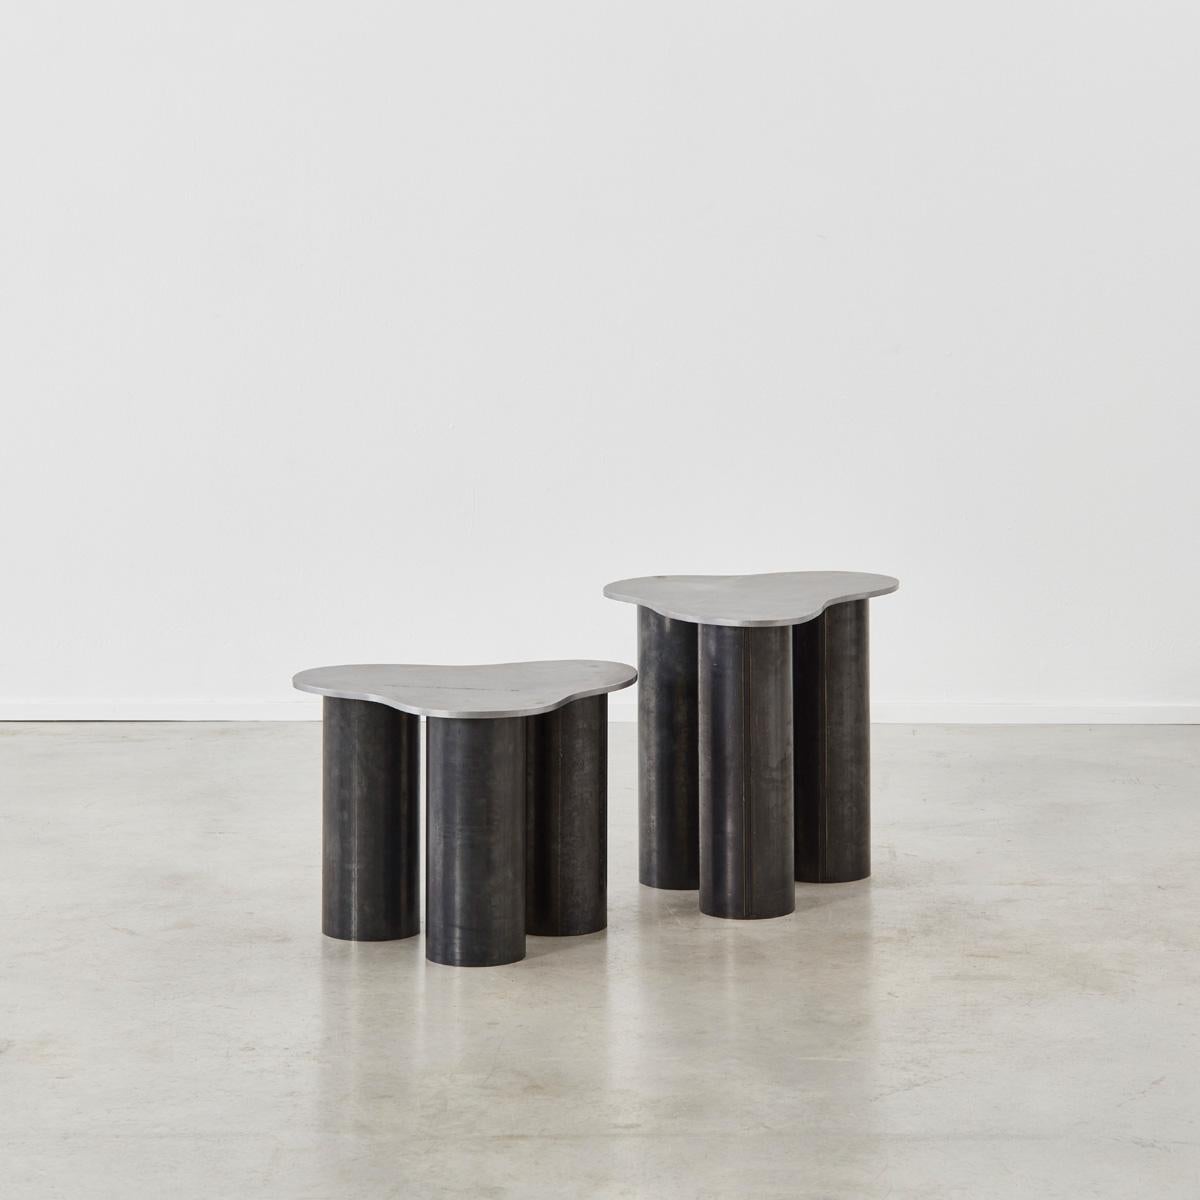 Side table 001 is a made to order design by Archive for Space, a multidisciplinary design practice founded in London in 2019. Side Table 001 was designed to celebrate raw steel through exploring the material’s cyclical nature. Made from standard